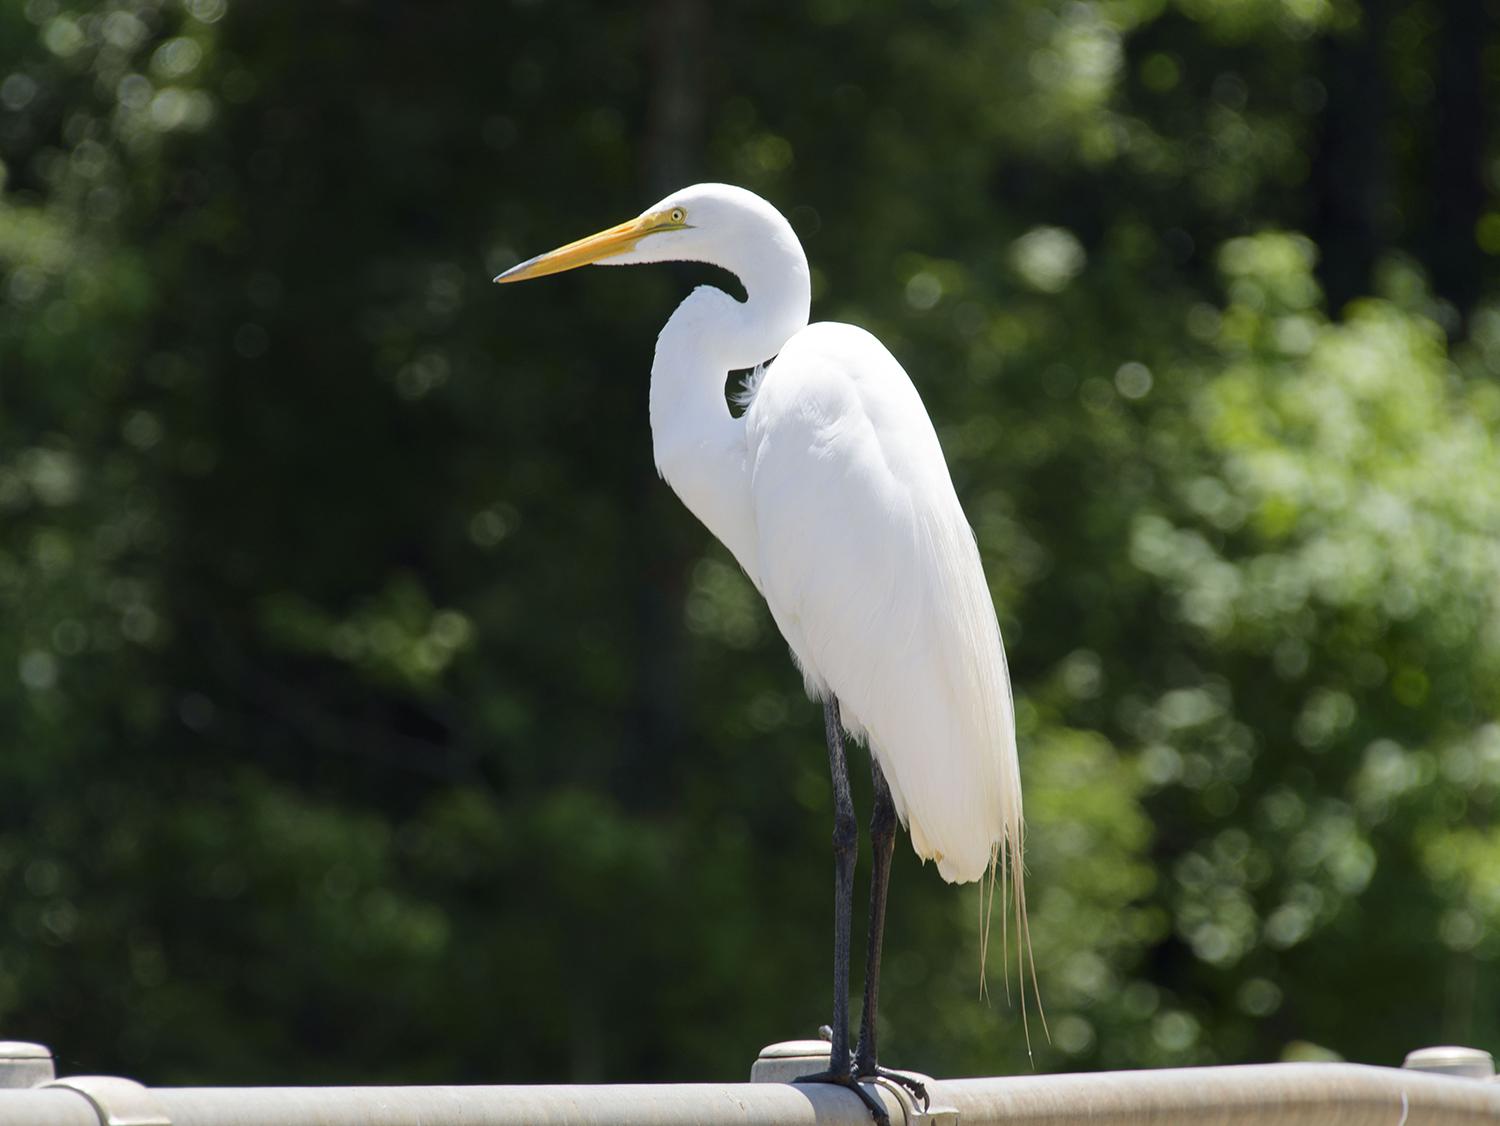 Great egrets, such as this one resting at the Sam D. Hamilton Noxubee National Wildlife Refuge in 2015, are not uncommon sights in Mississippi’s state parks. The refuge is located in Noxubee, Oktibbeha and Winston counties. (File photo by MSU Extension Service/Kevin Hudson)